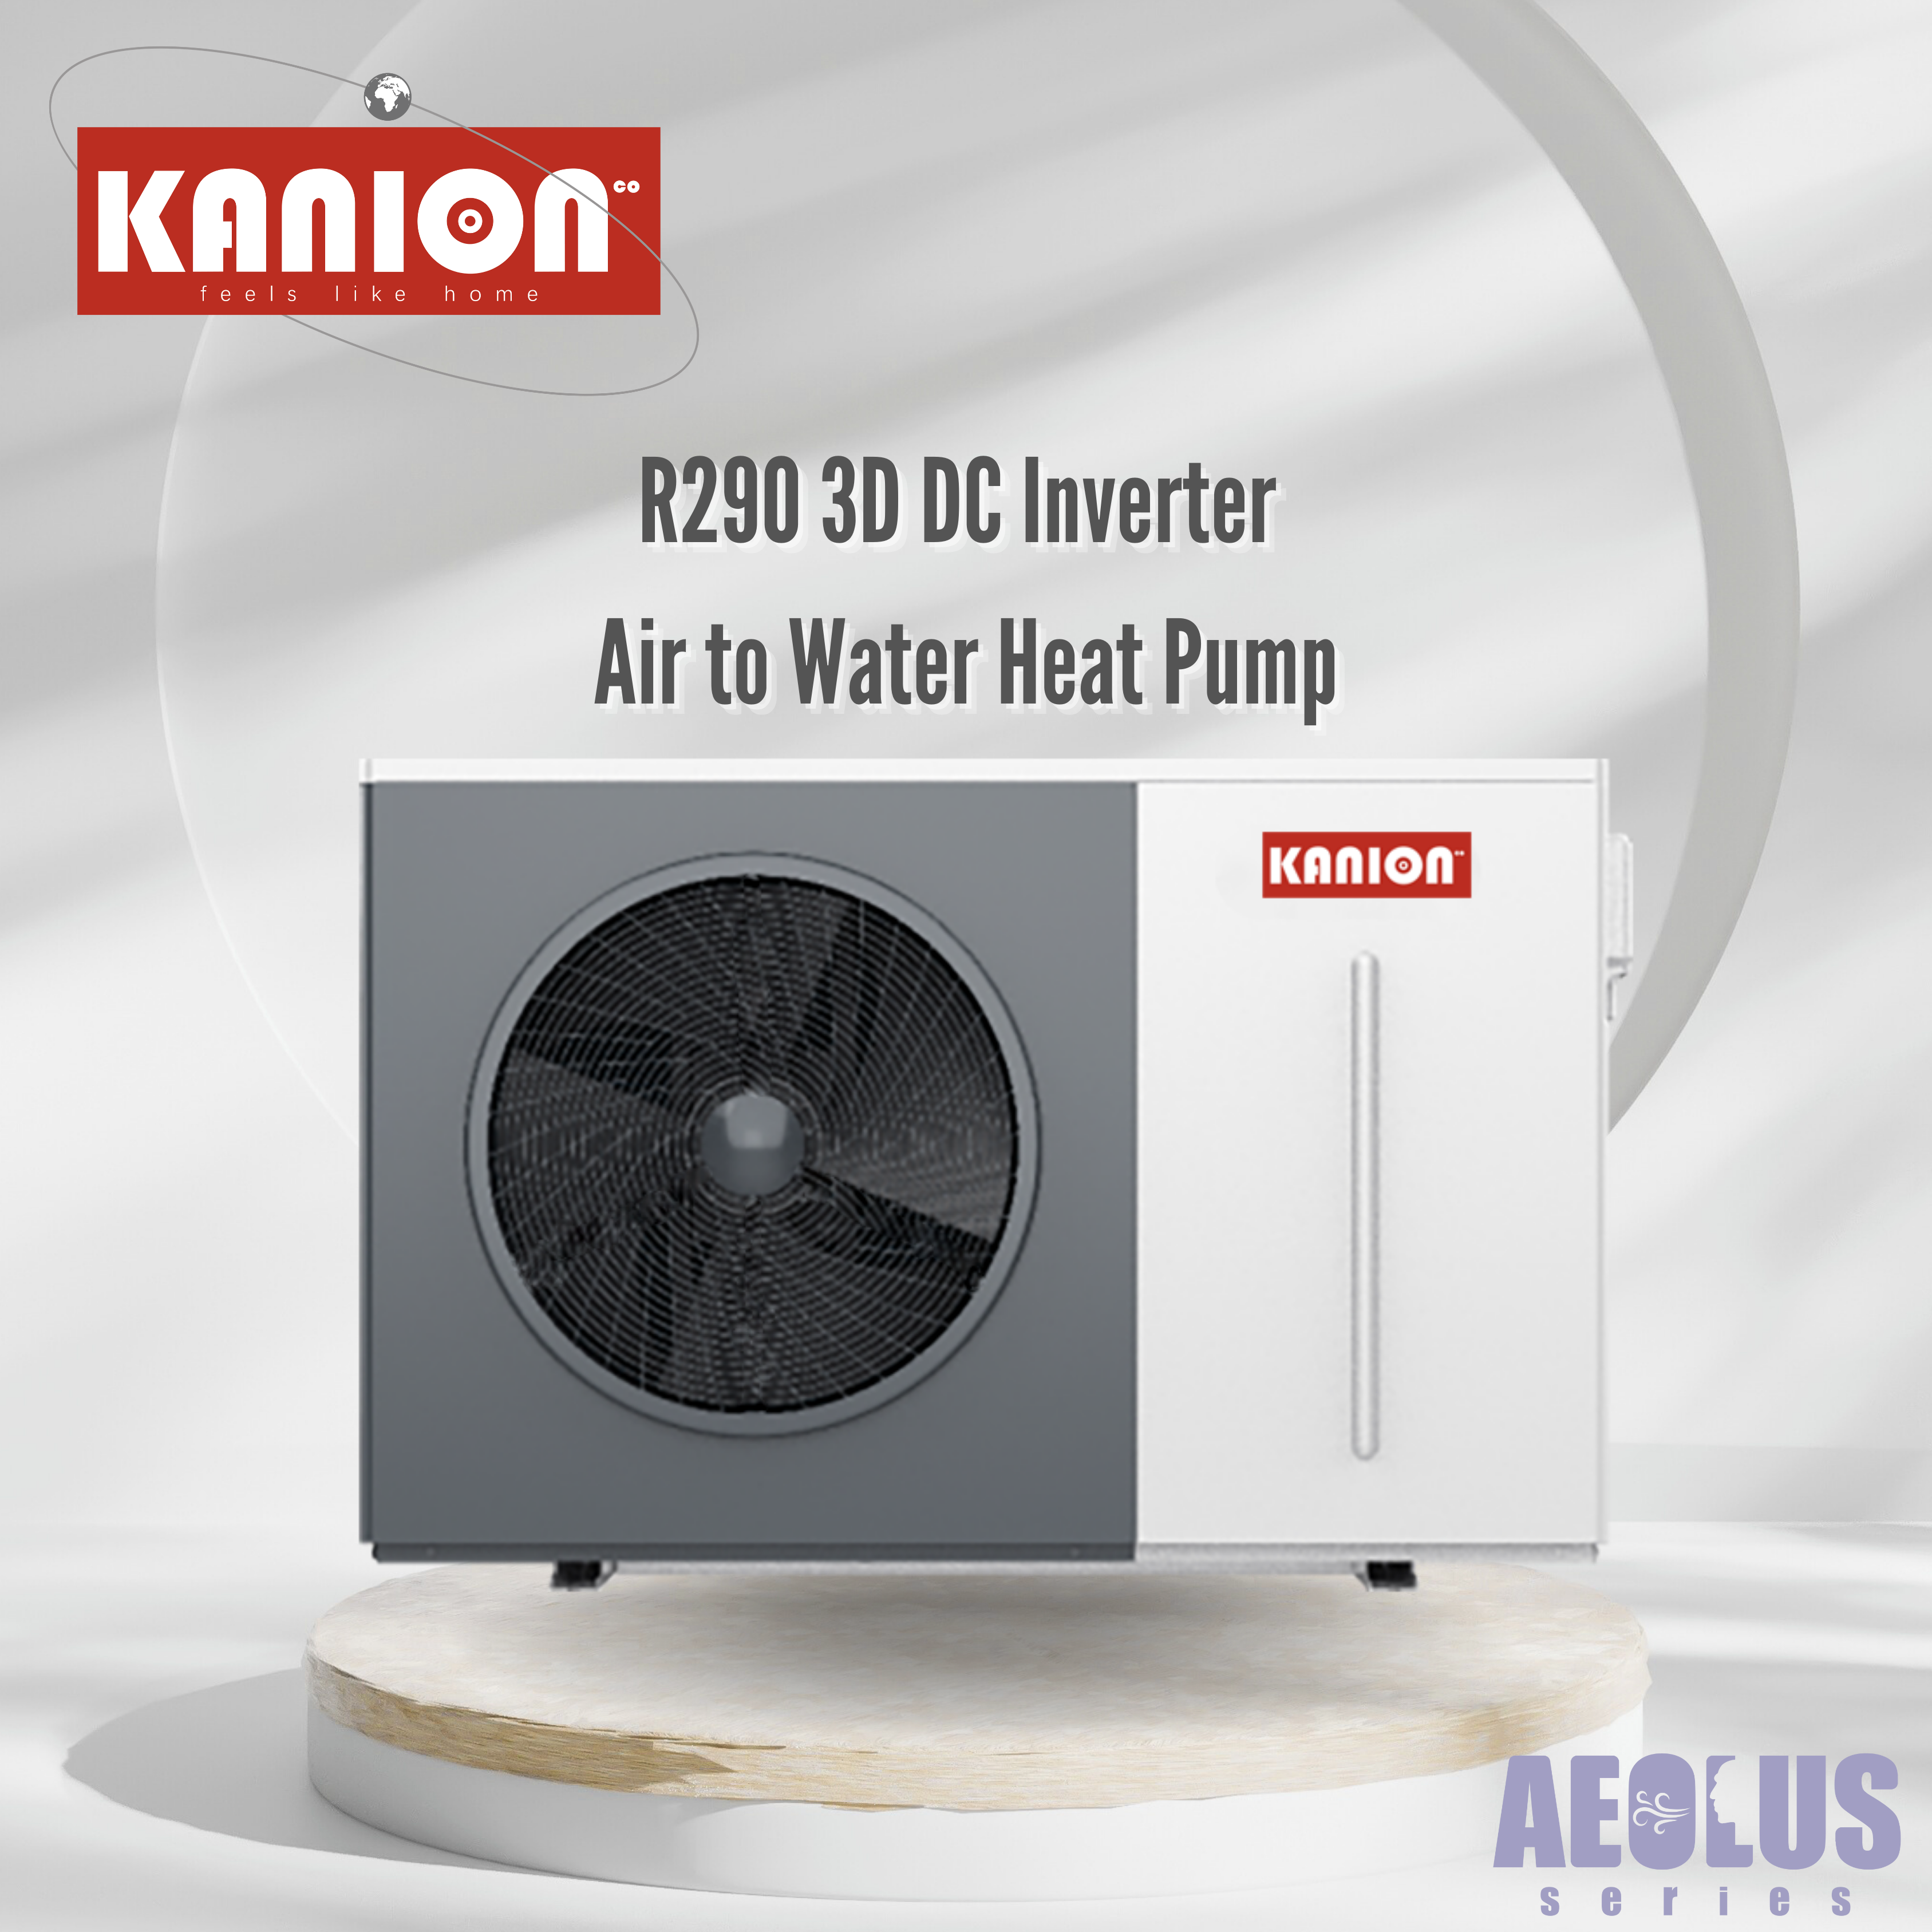 Kanion Co 3D DC Inverter Air to Water Heat Pump 